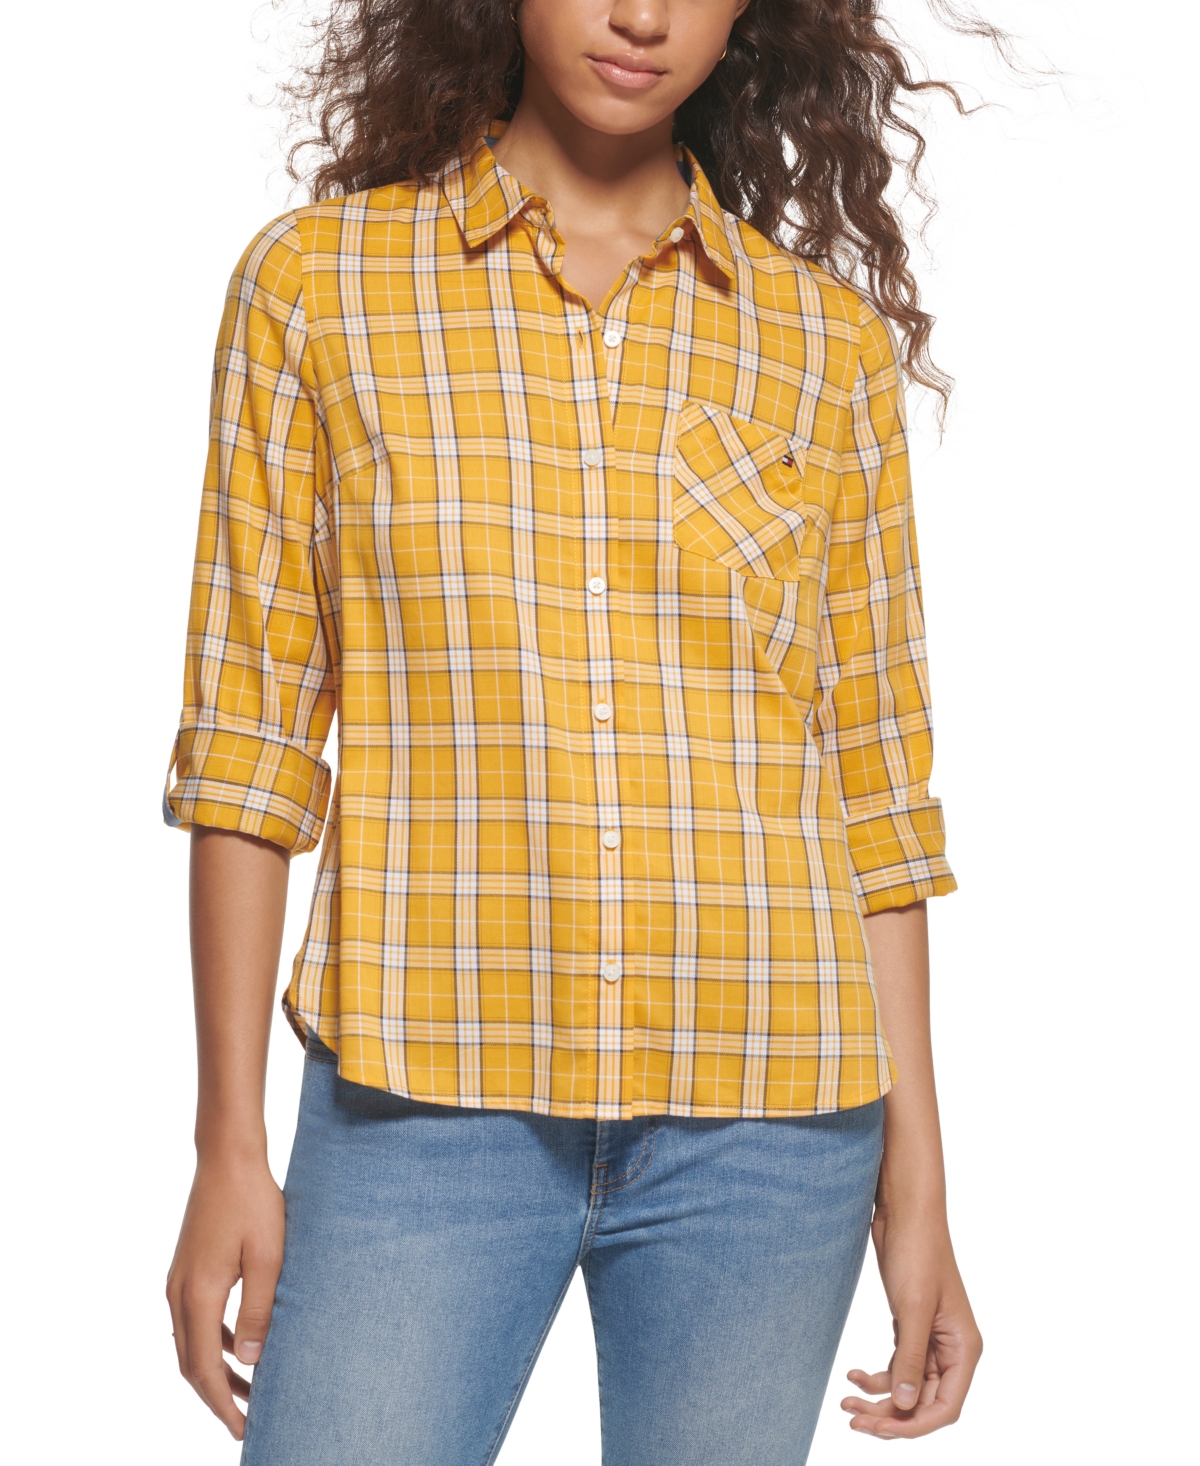 Tommy Hilfiger Women's Roll-Tab Plaid Buttoned Top